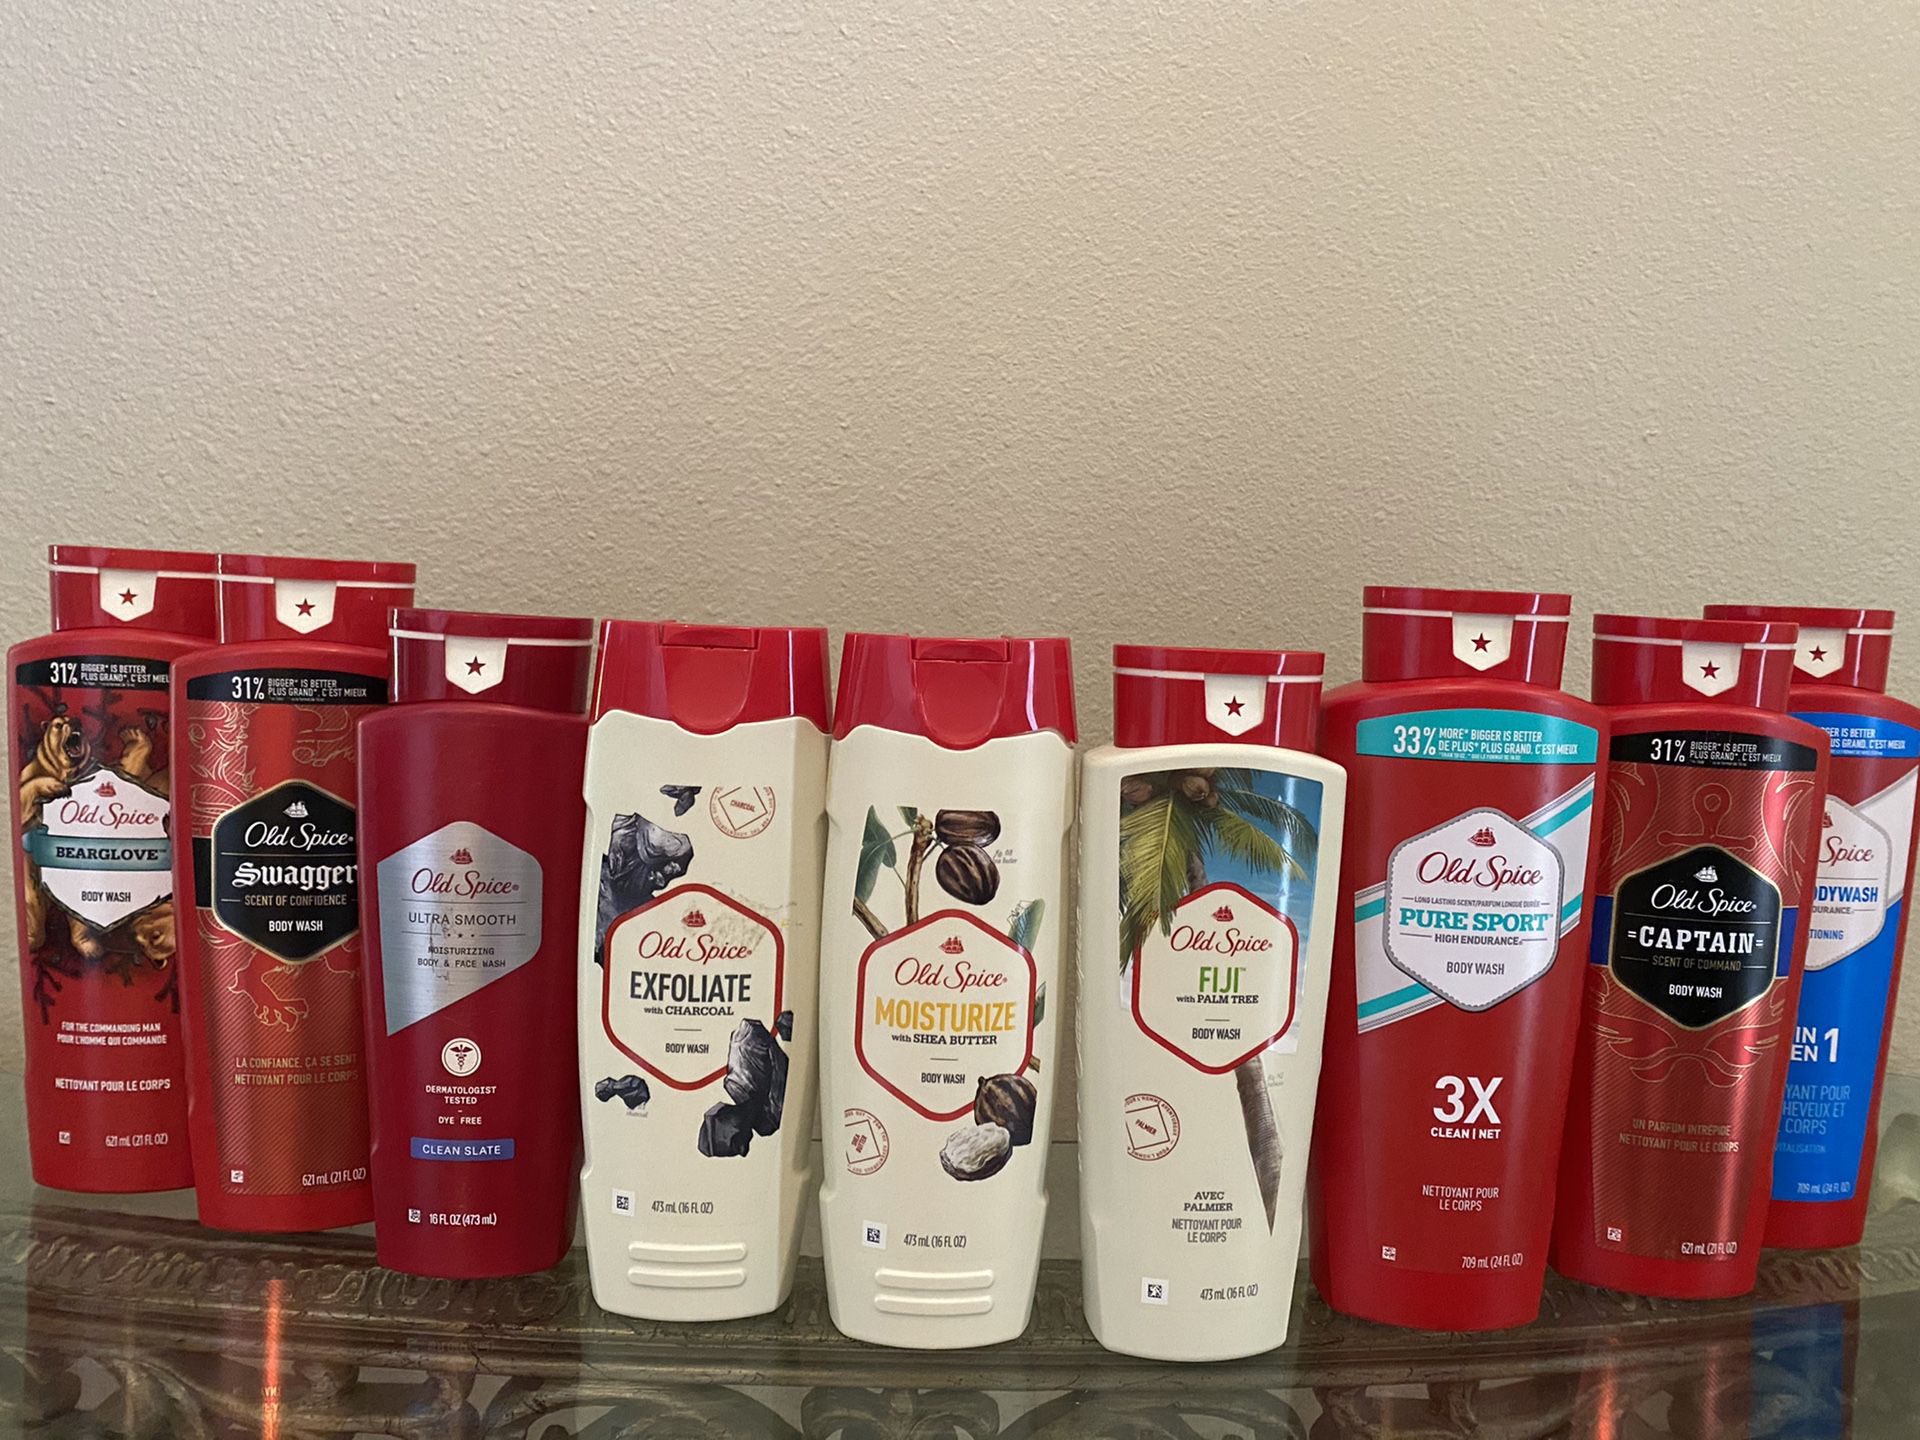 Old Spice body wash 2/$7